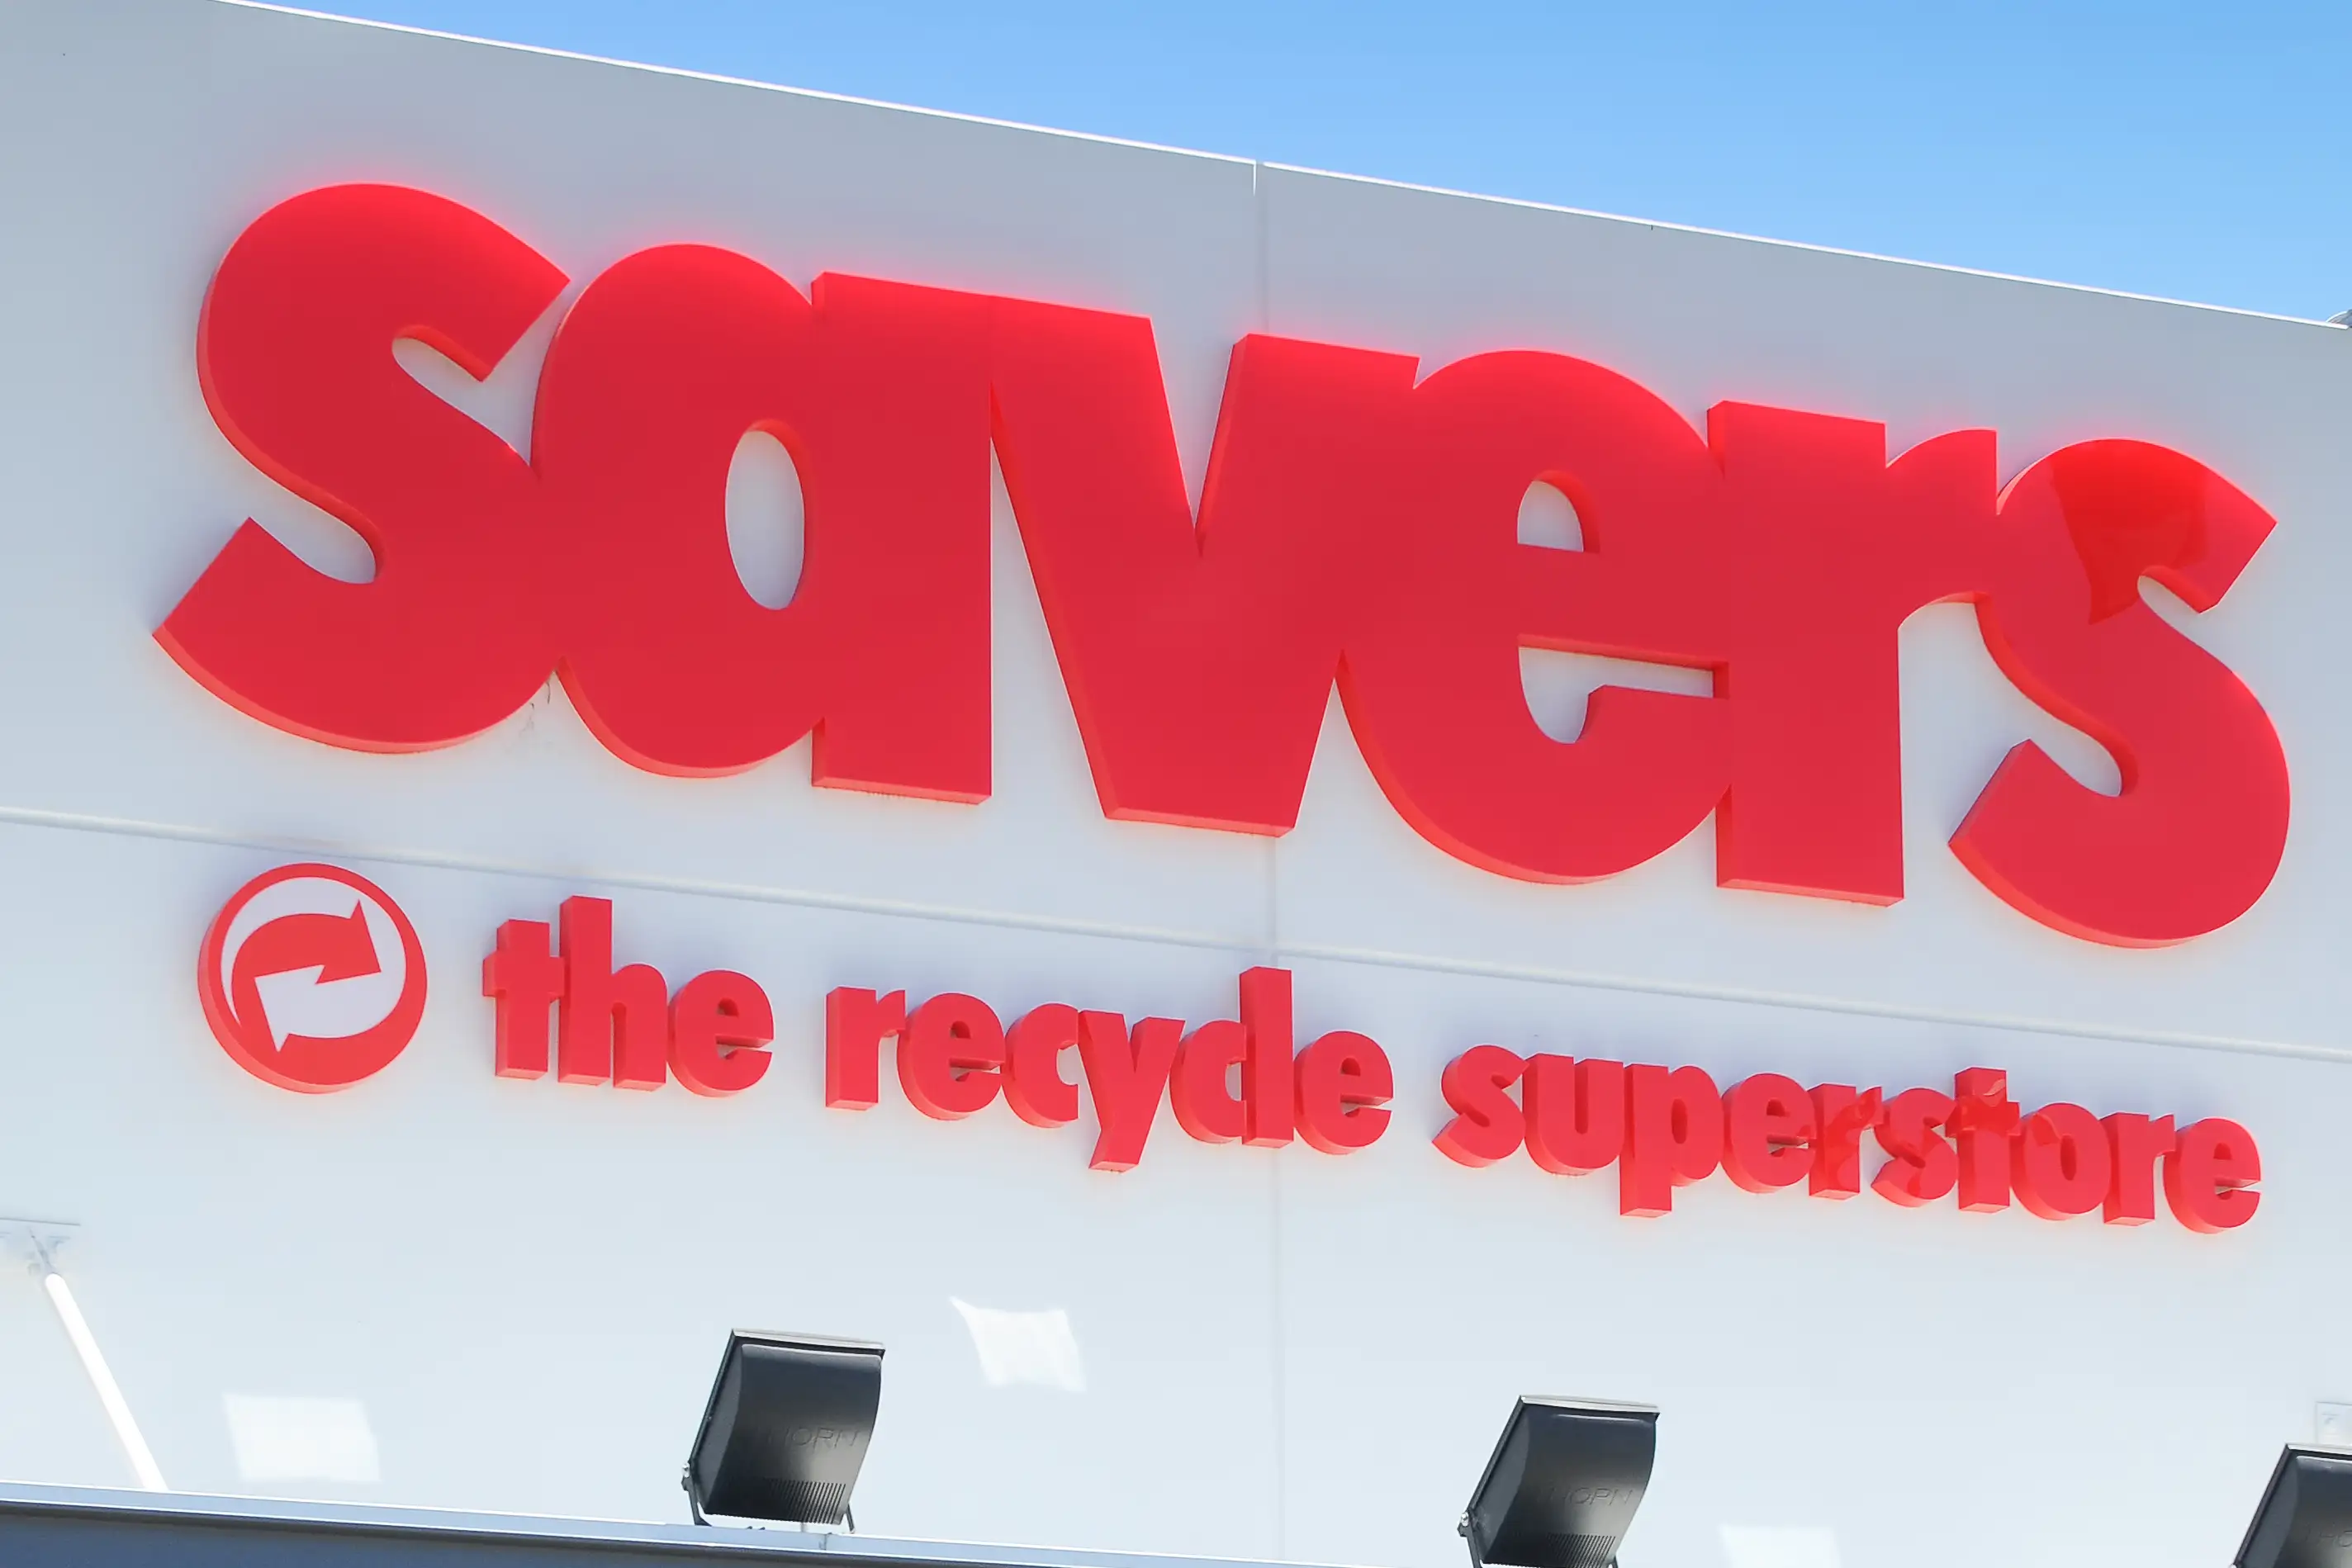 Savers Recycle Superstore